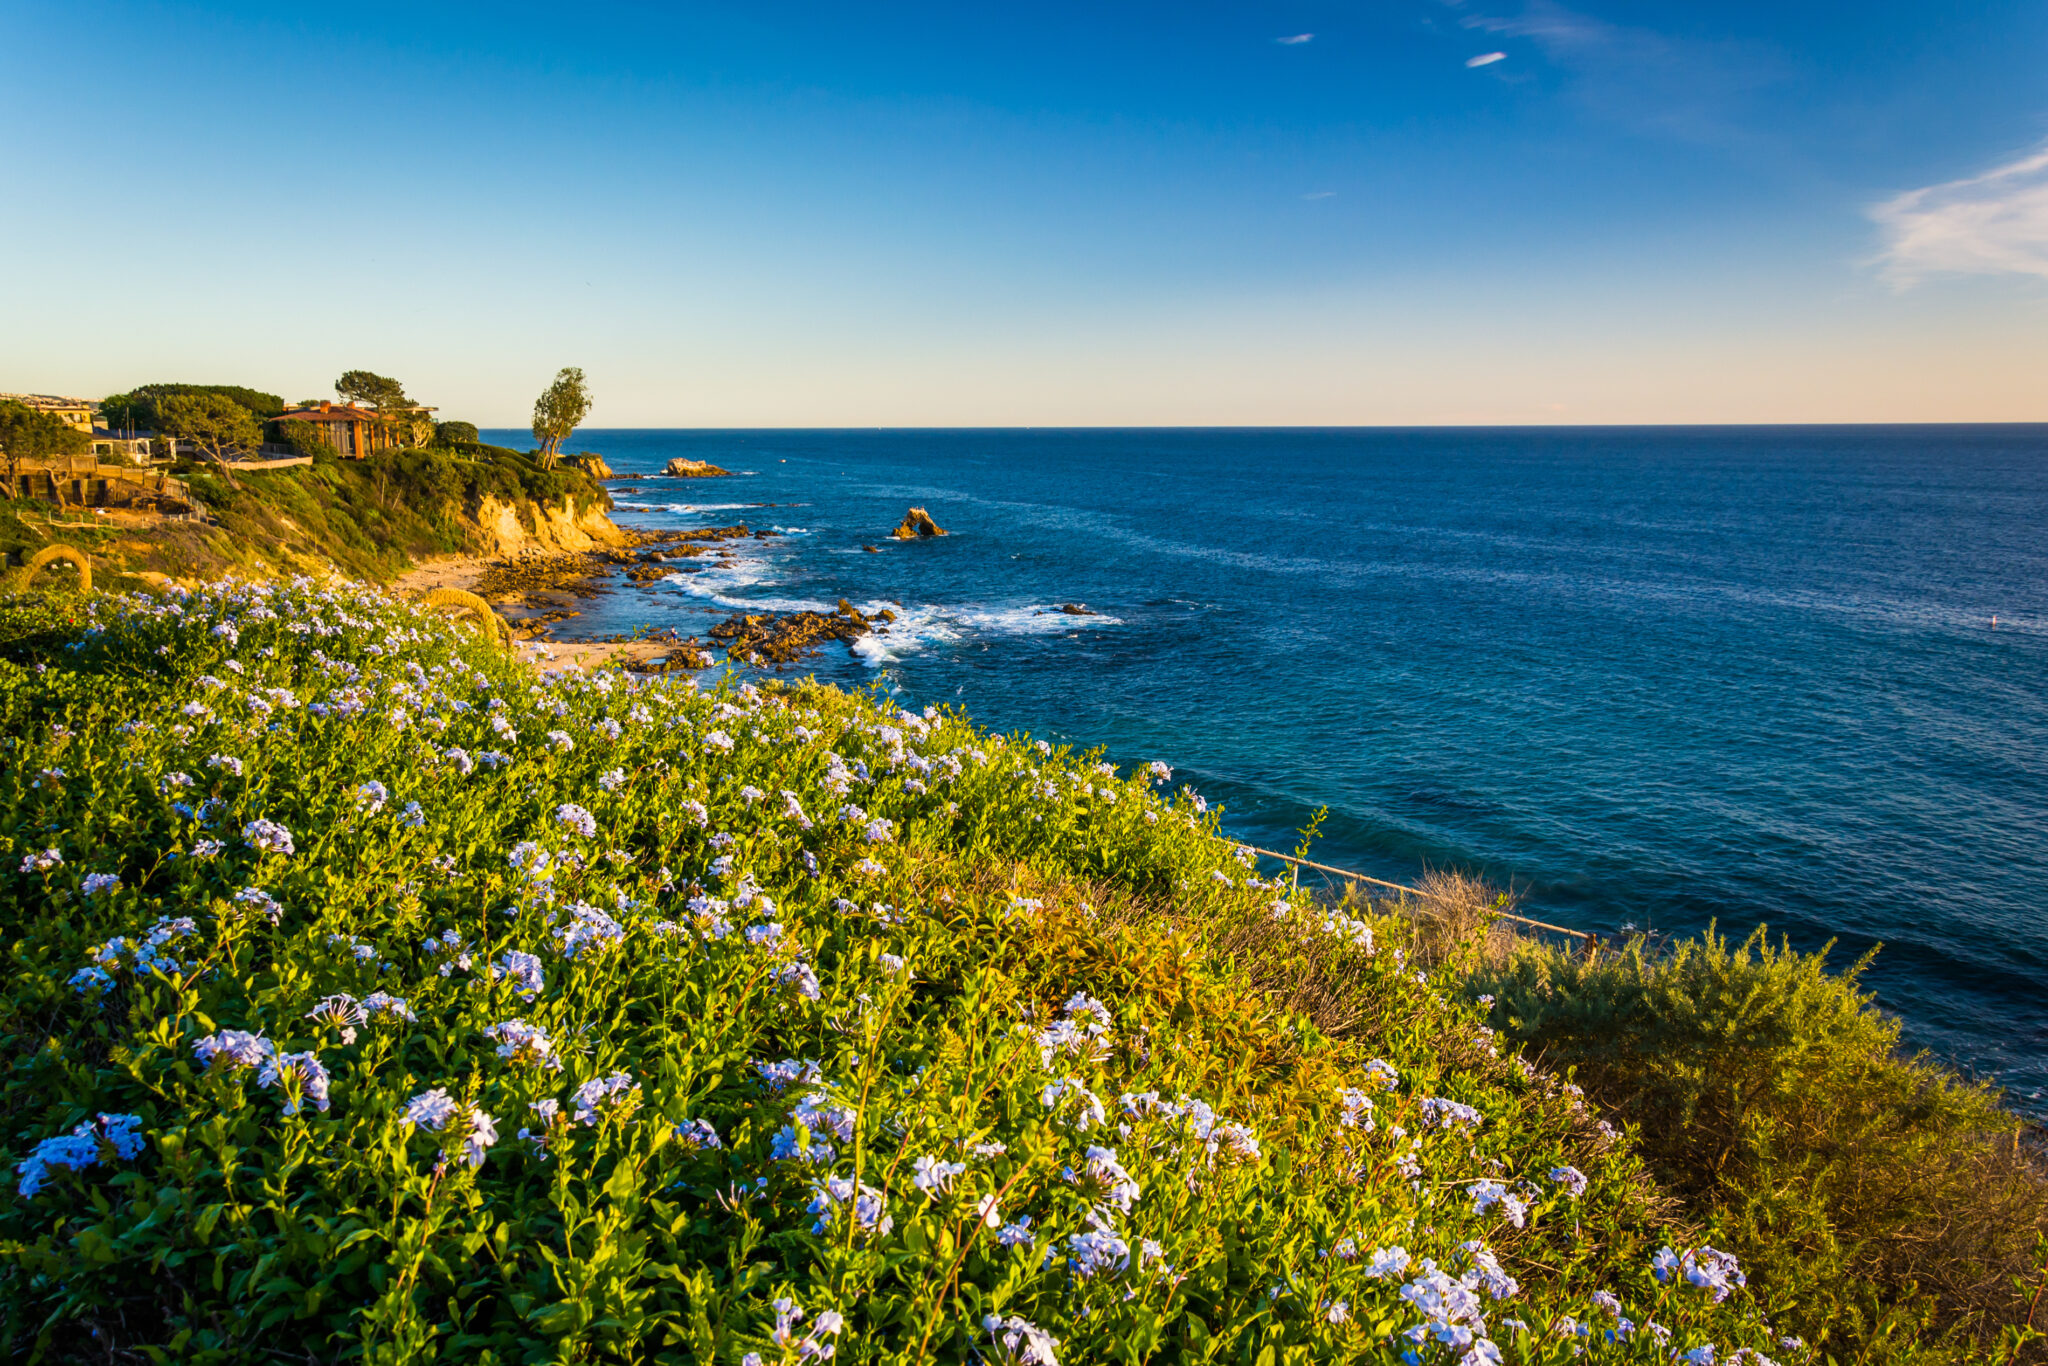 Flowers,And,View,Of,The,Pacific,Ocean,From,Cliffs,In